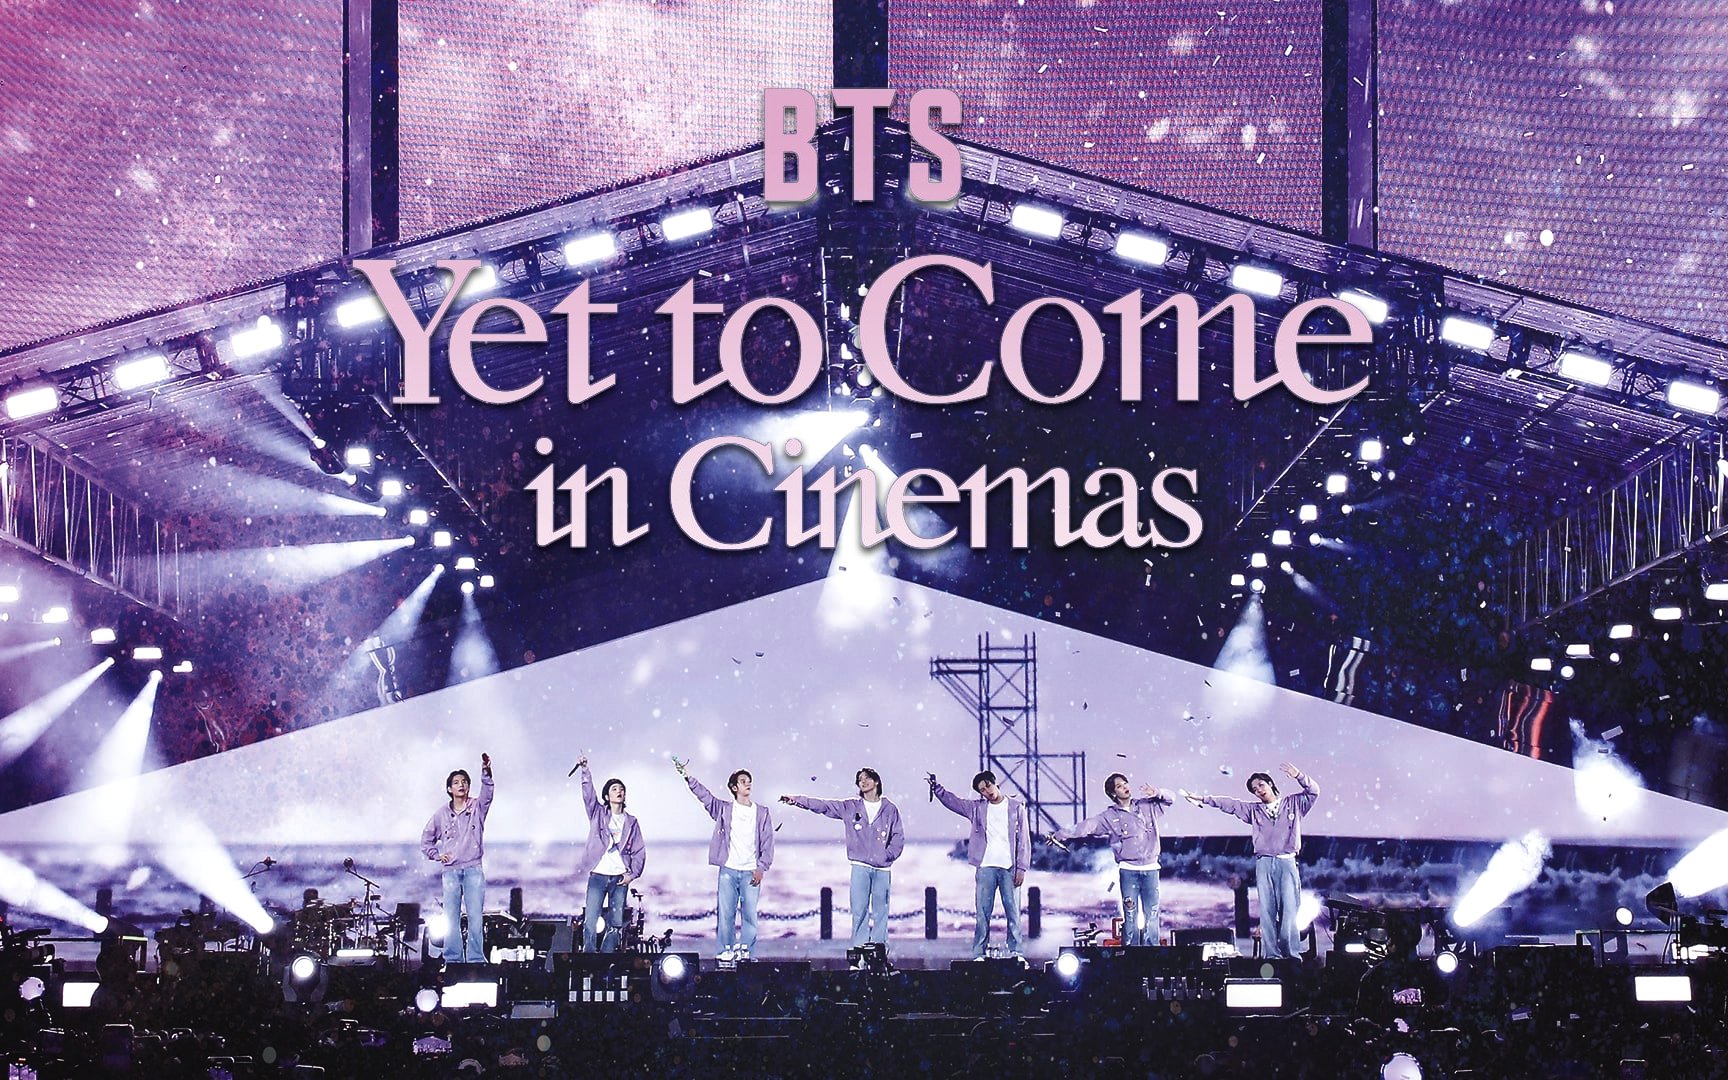 BTS's 'Yet to Come in Busan' Concert to be released in cinemas 